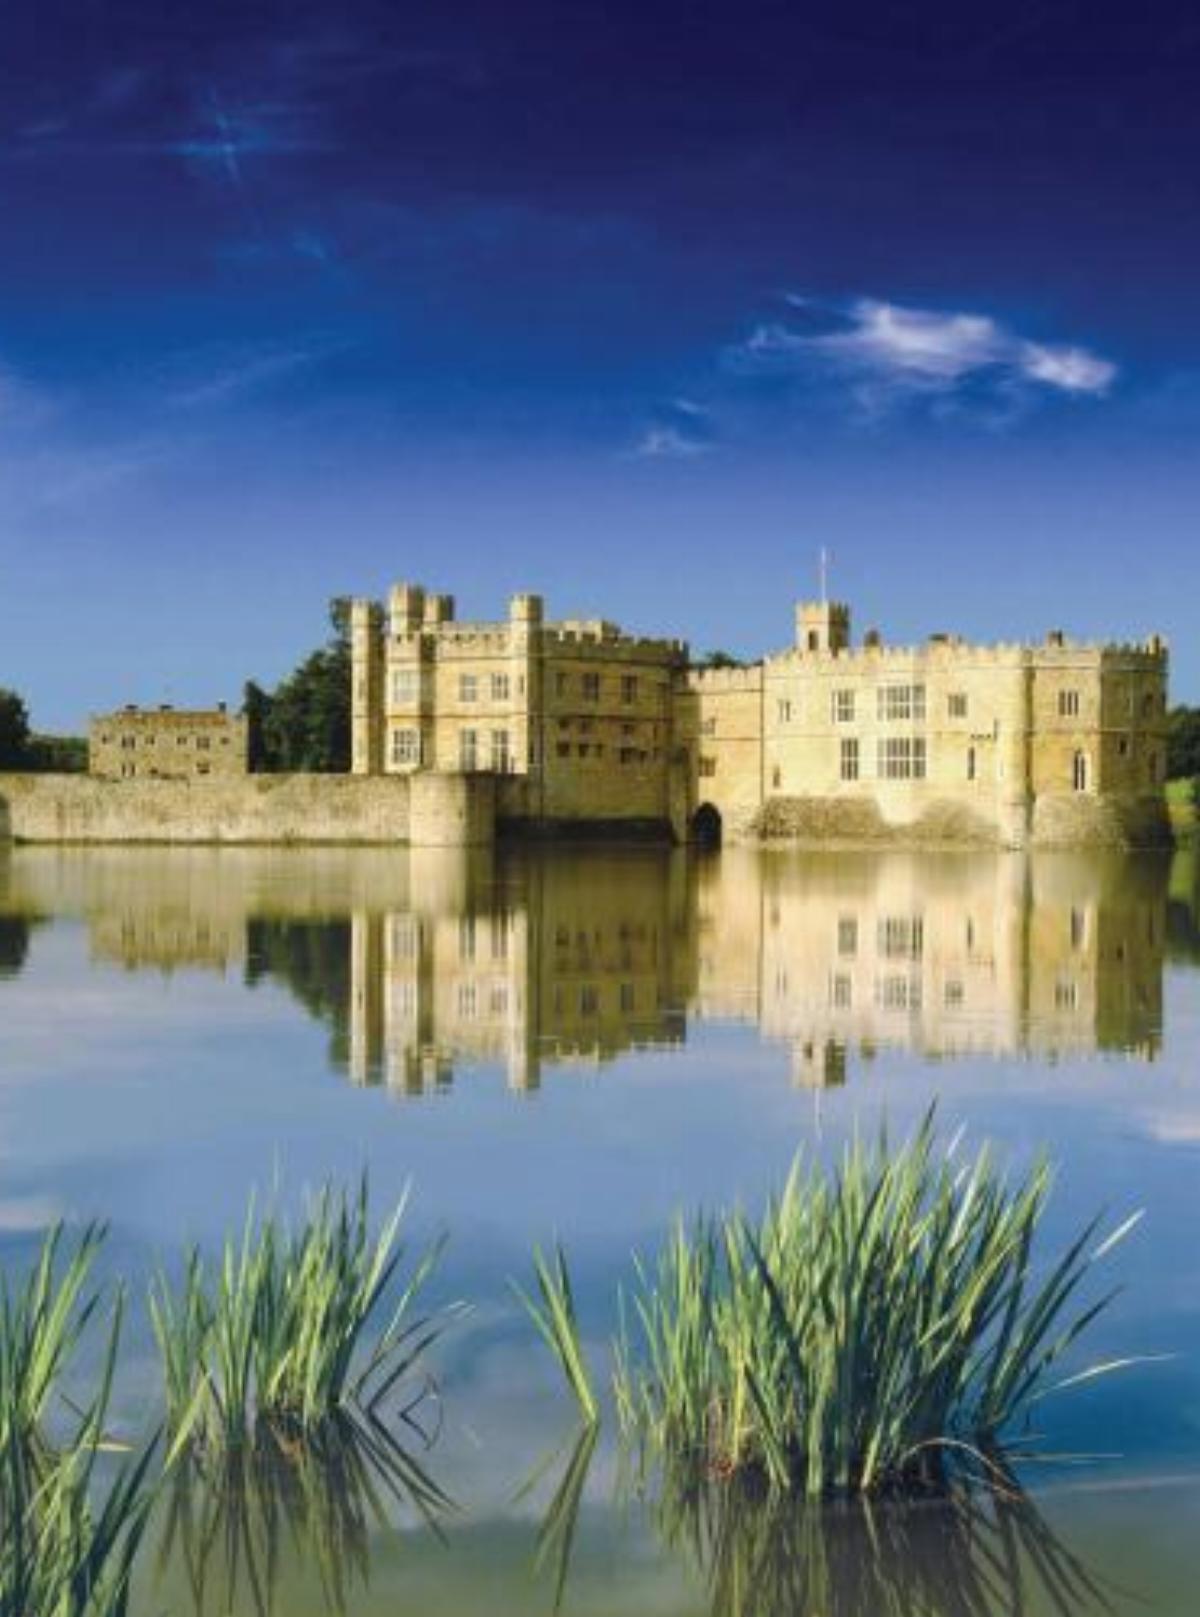 Stable Courtyard Bedrooms At Leeds Castle Hotel Maidstone United Kingdom